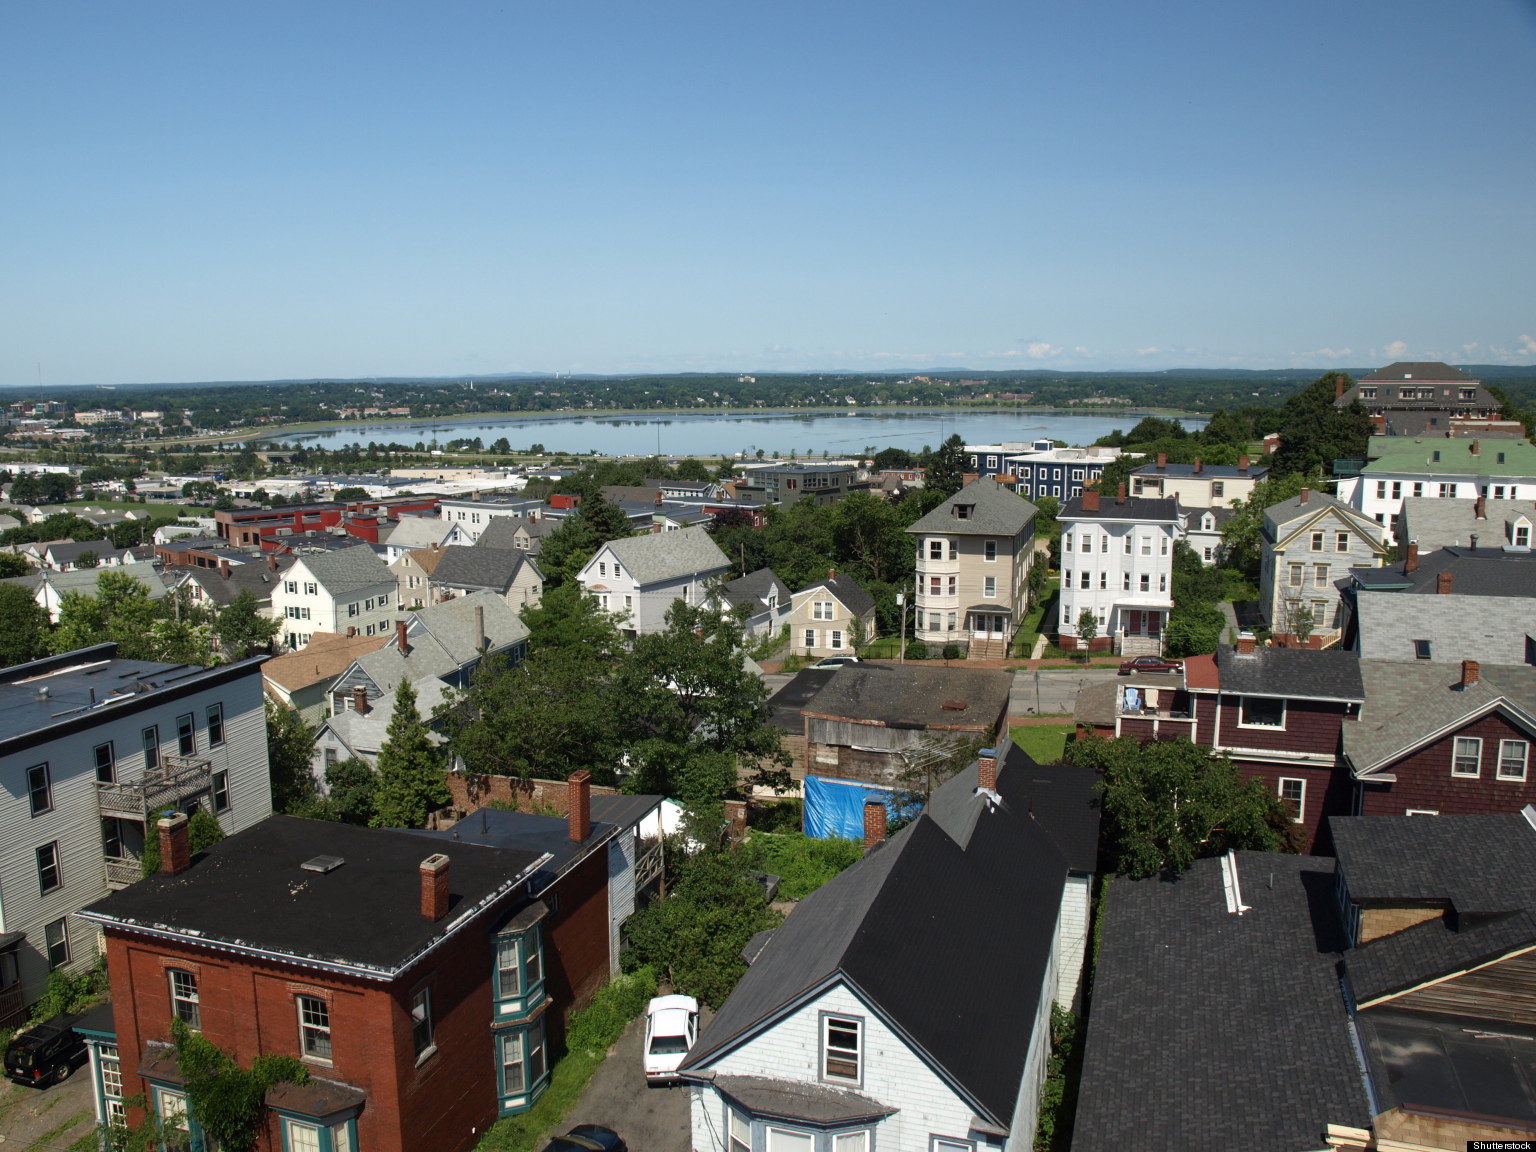 Maine Earthquake Facts: How Unusual Was The Tremor On October 16th? | HuffPost